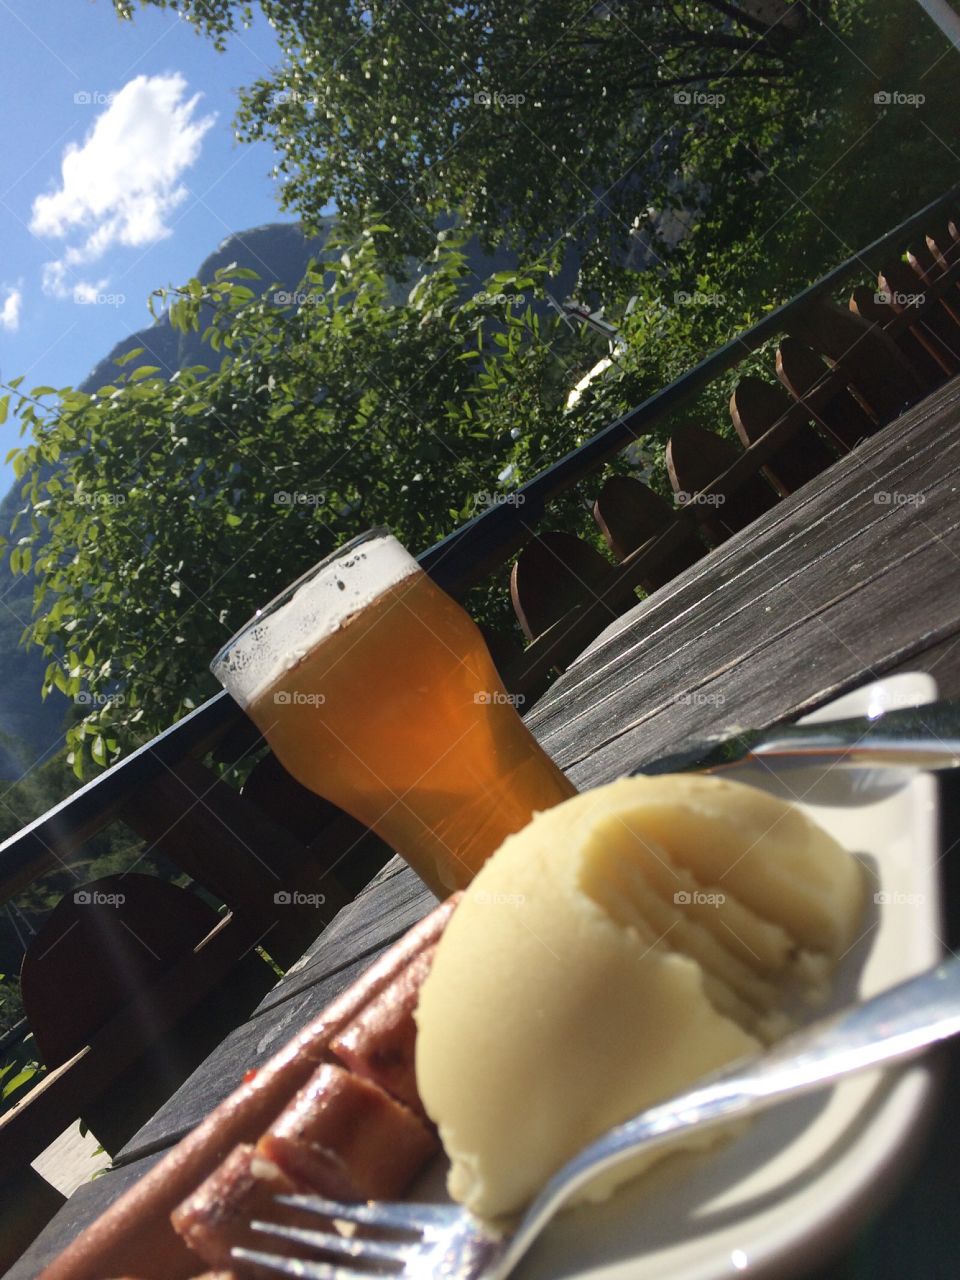 Norway mountain lunch